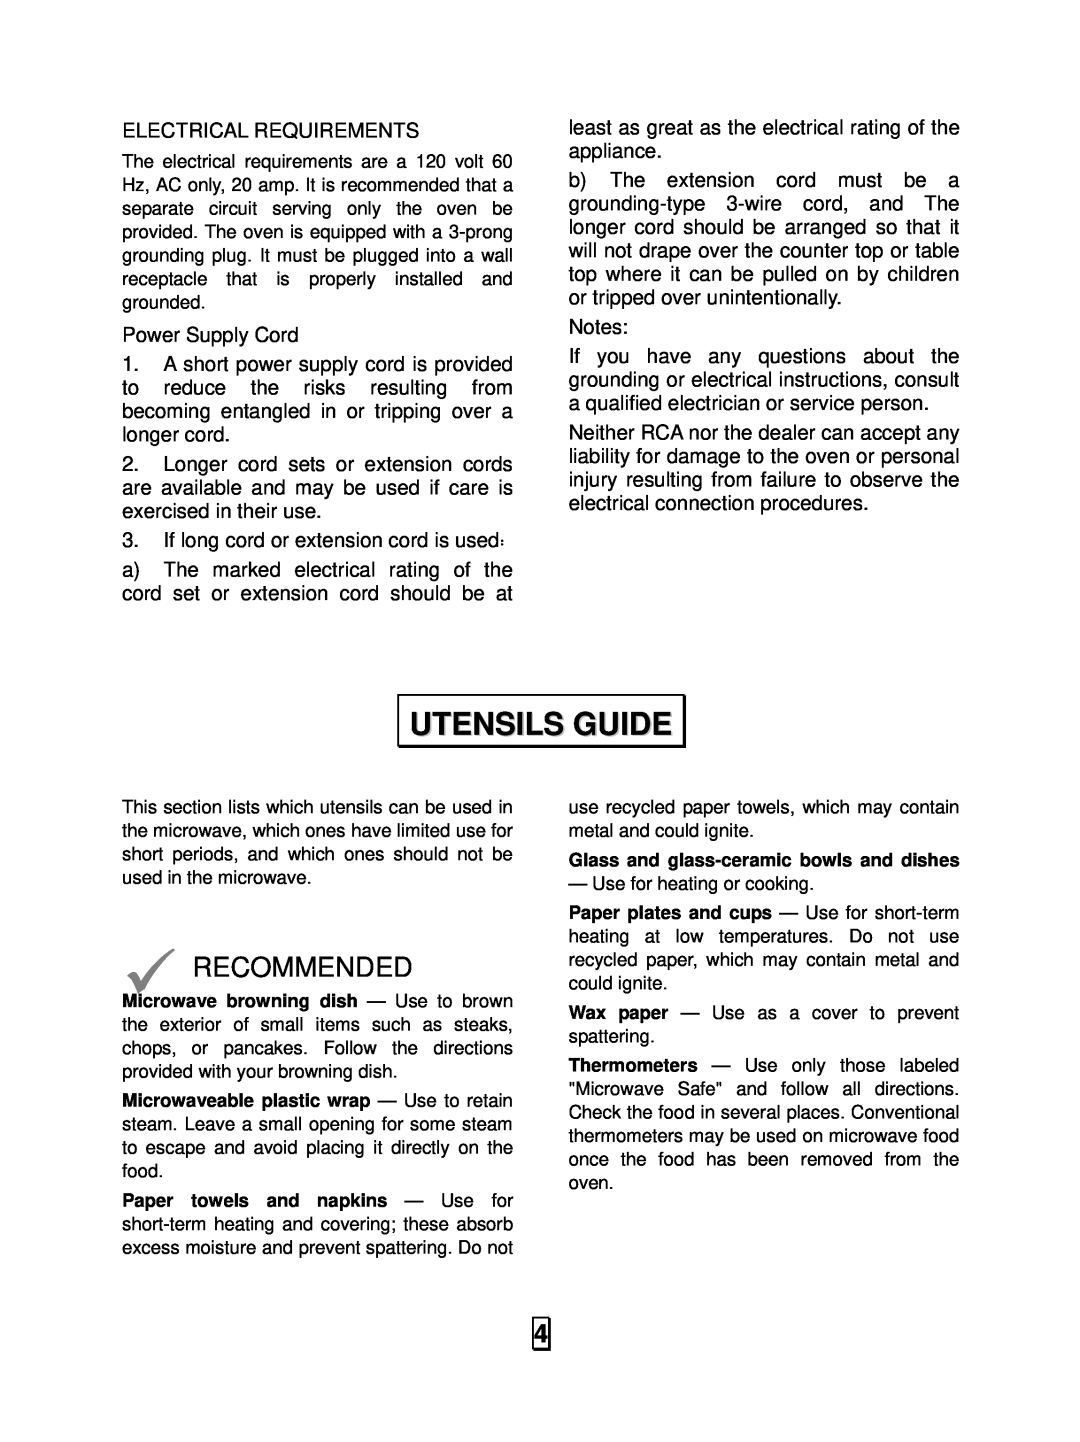 RCA RMW966 manual Utensils Guide, Recommended 